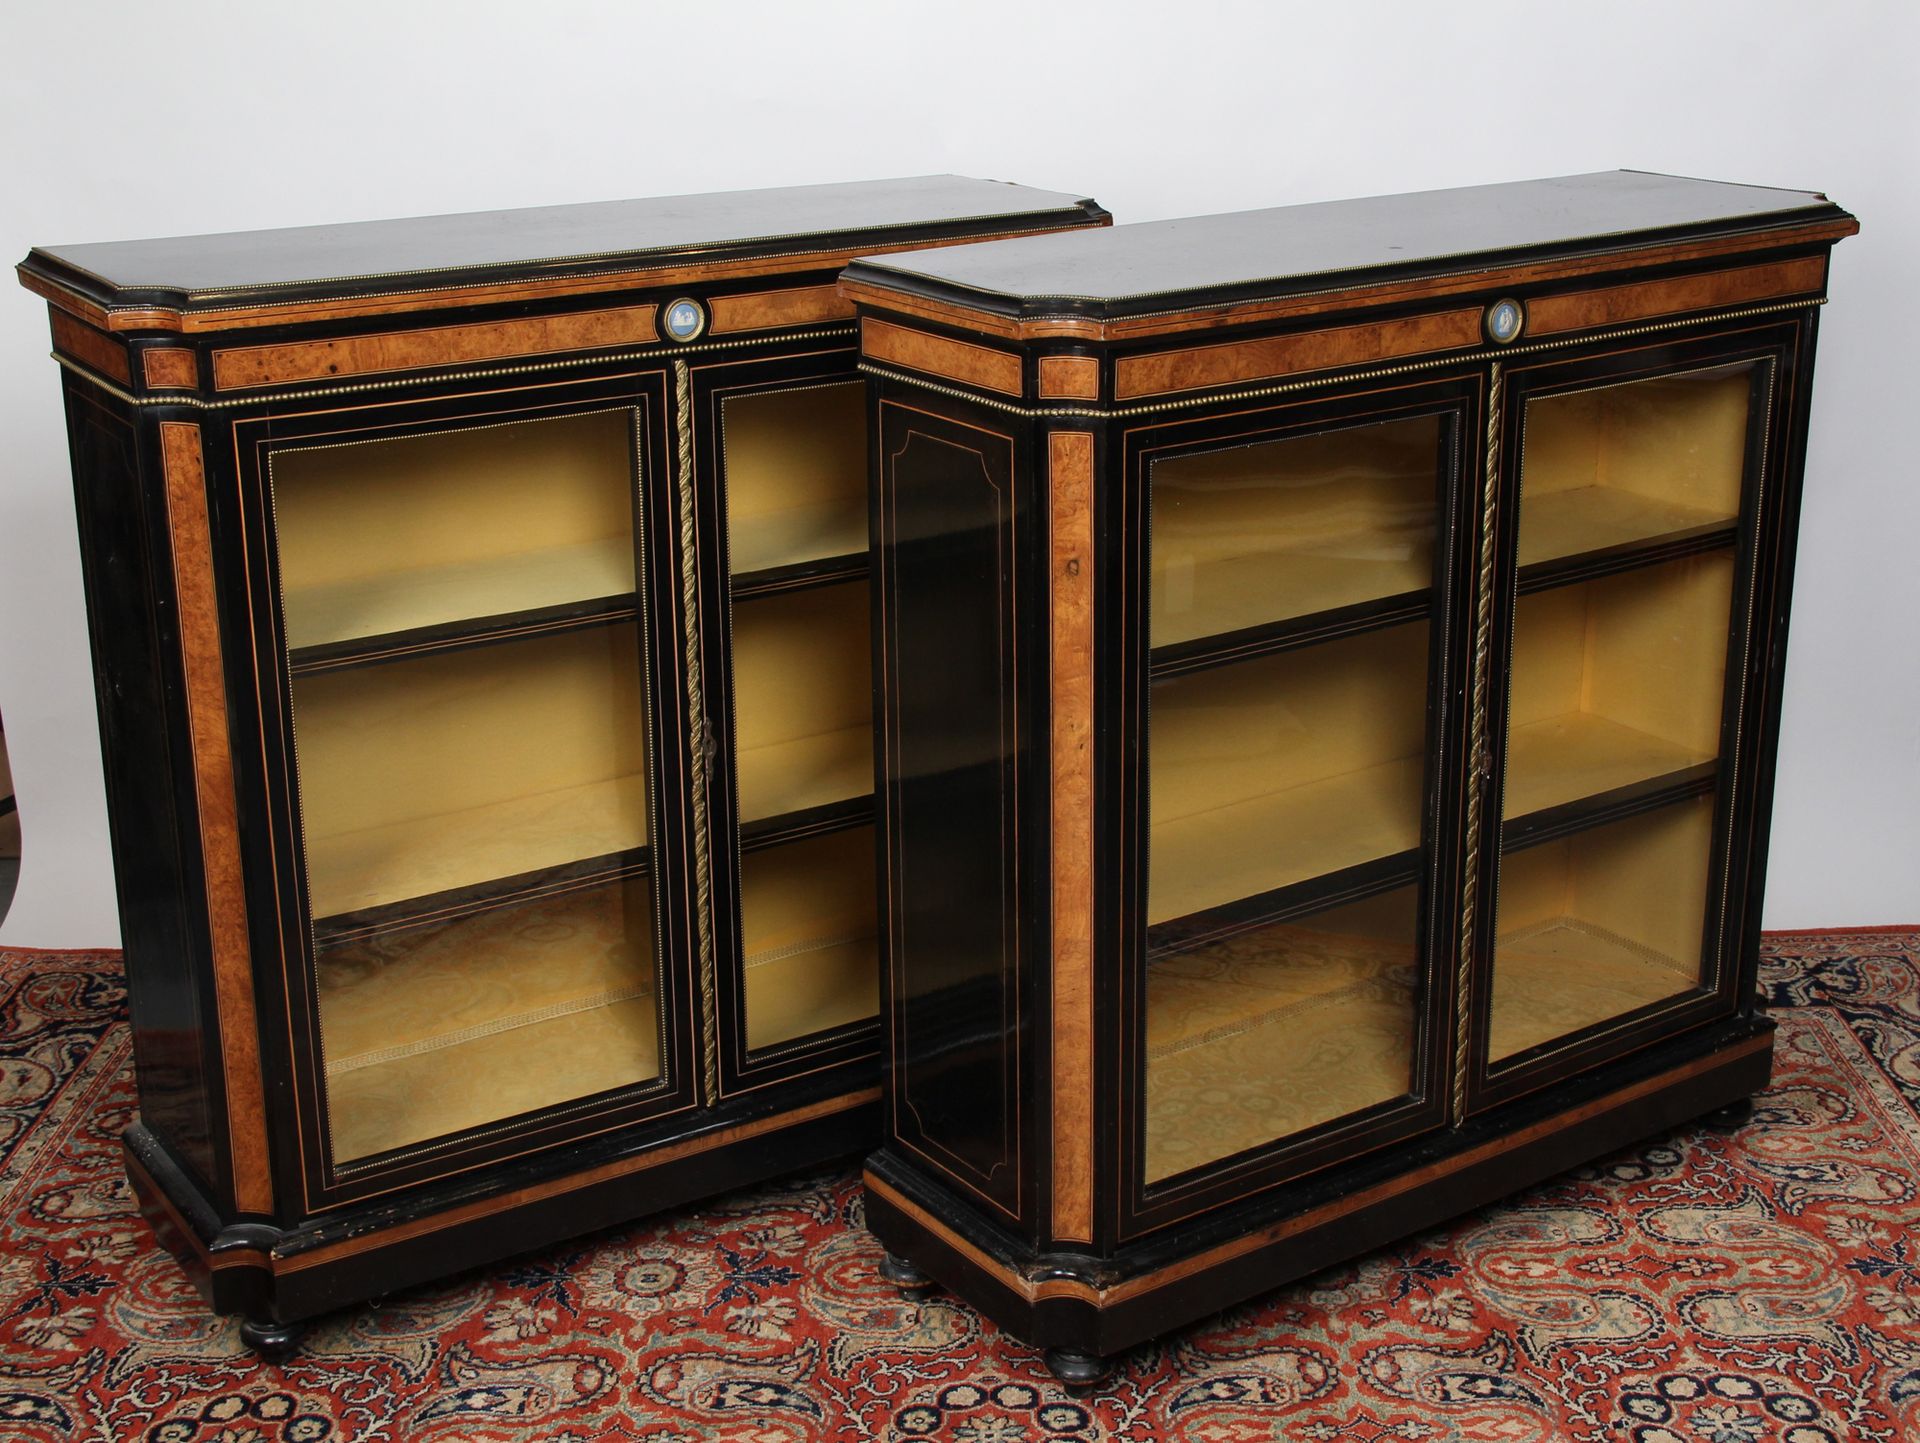 Null PAIR OF DISPLAY CABINETS AT TABLE HEIGHT

in blackened wood and burr walnut&hellip;